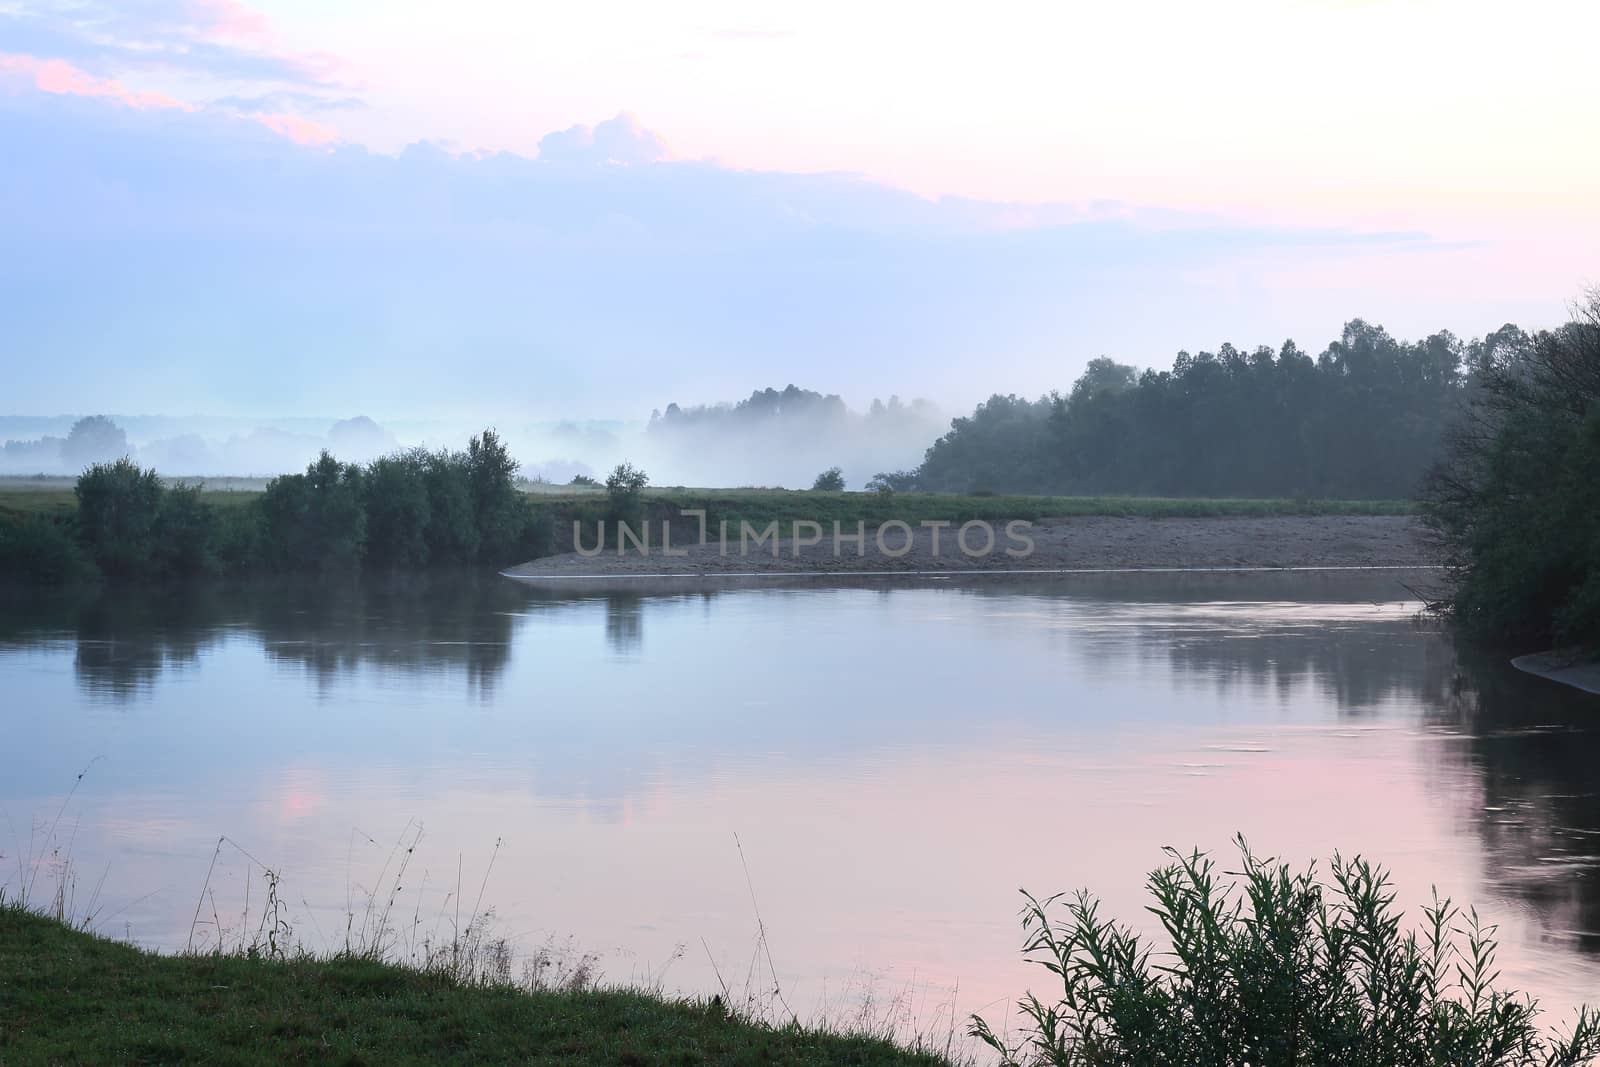 Landscape with the image of the river and the surrounding nature in the early misty morning.